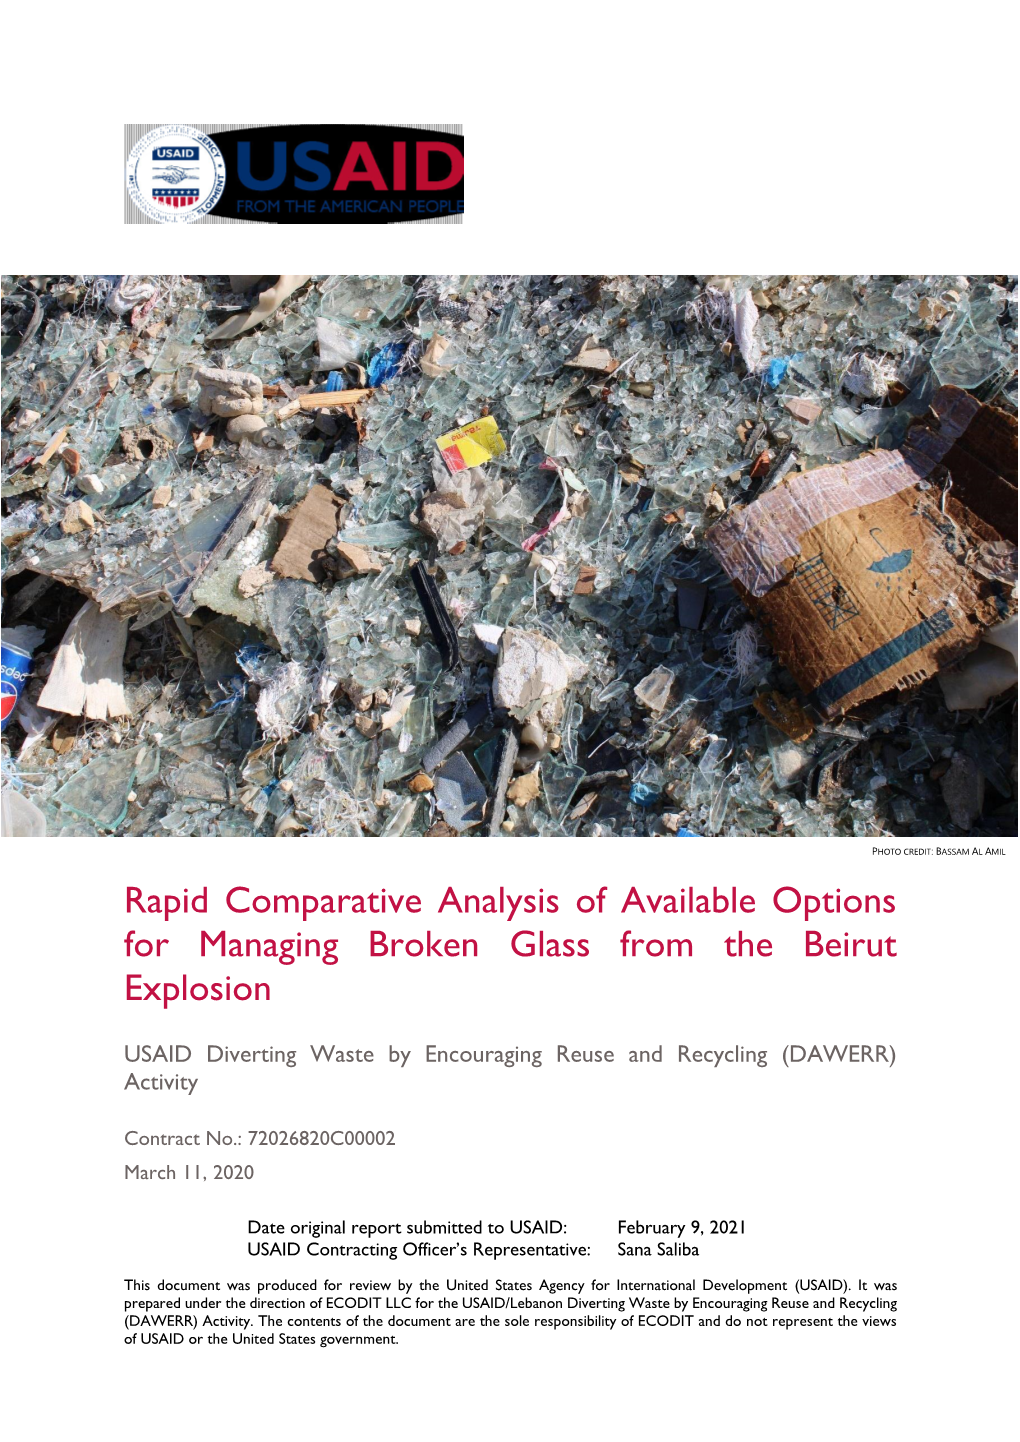 Rapid Comparative Analysis of Available Options for Managing Broken Glass from the Beirut Explosion